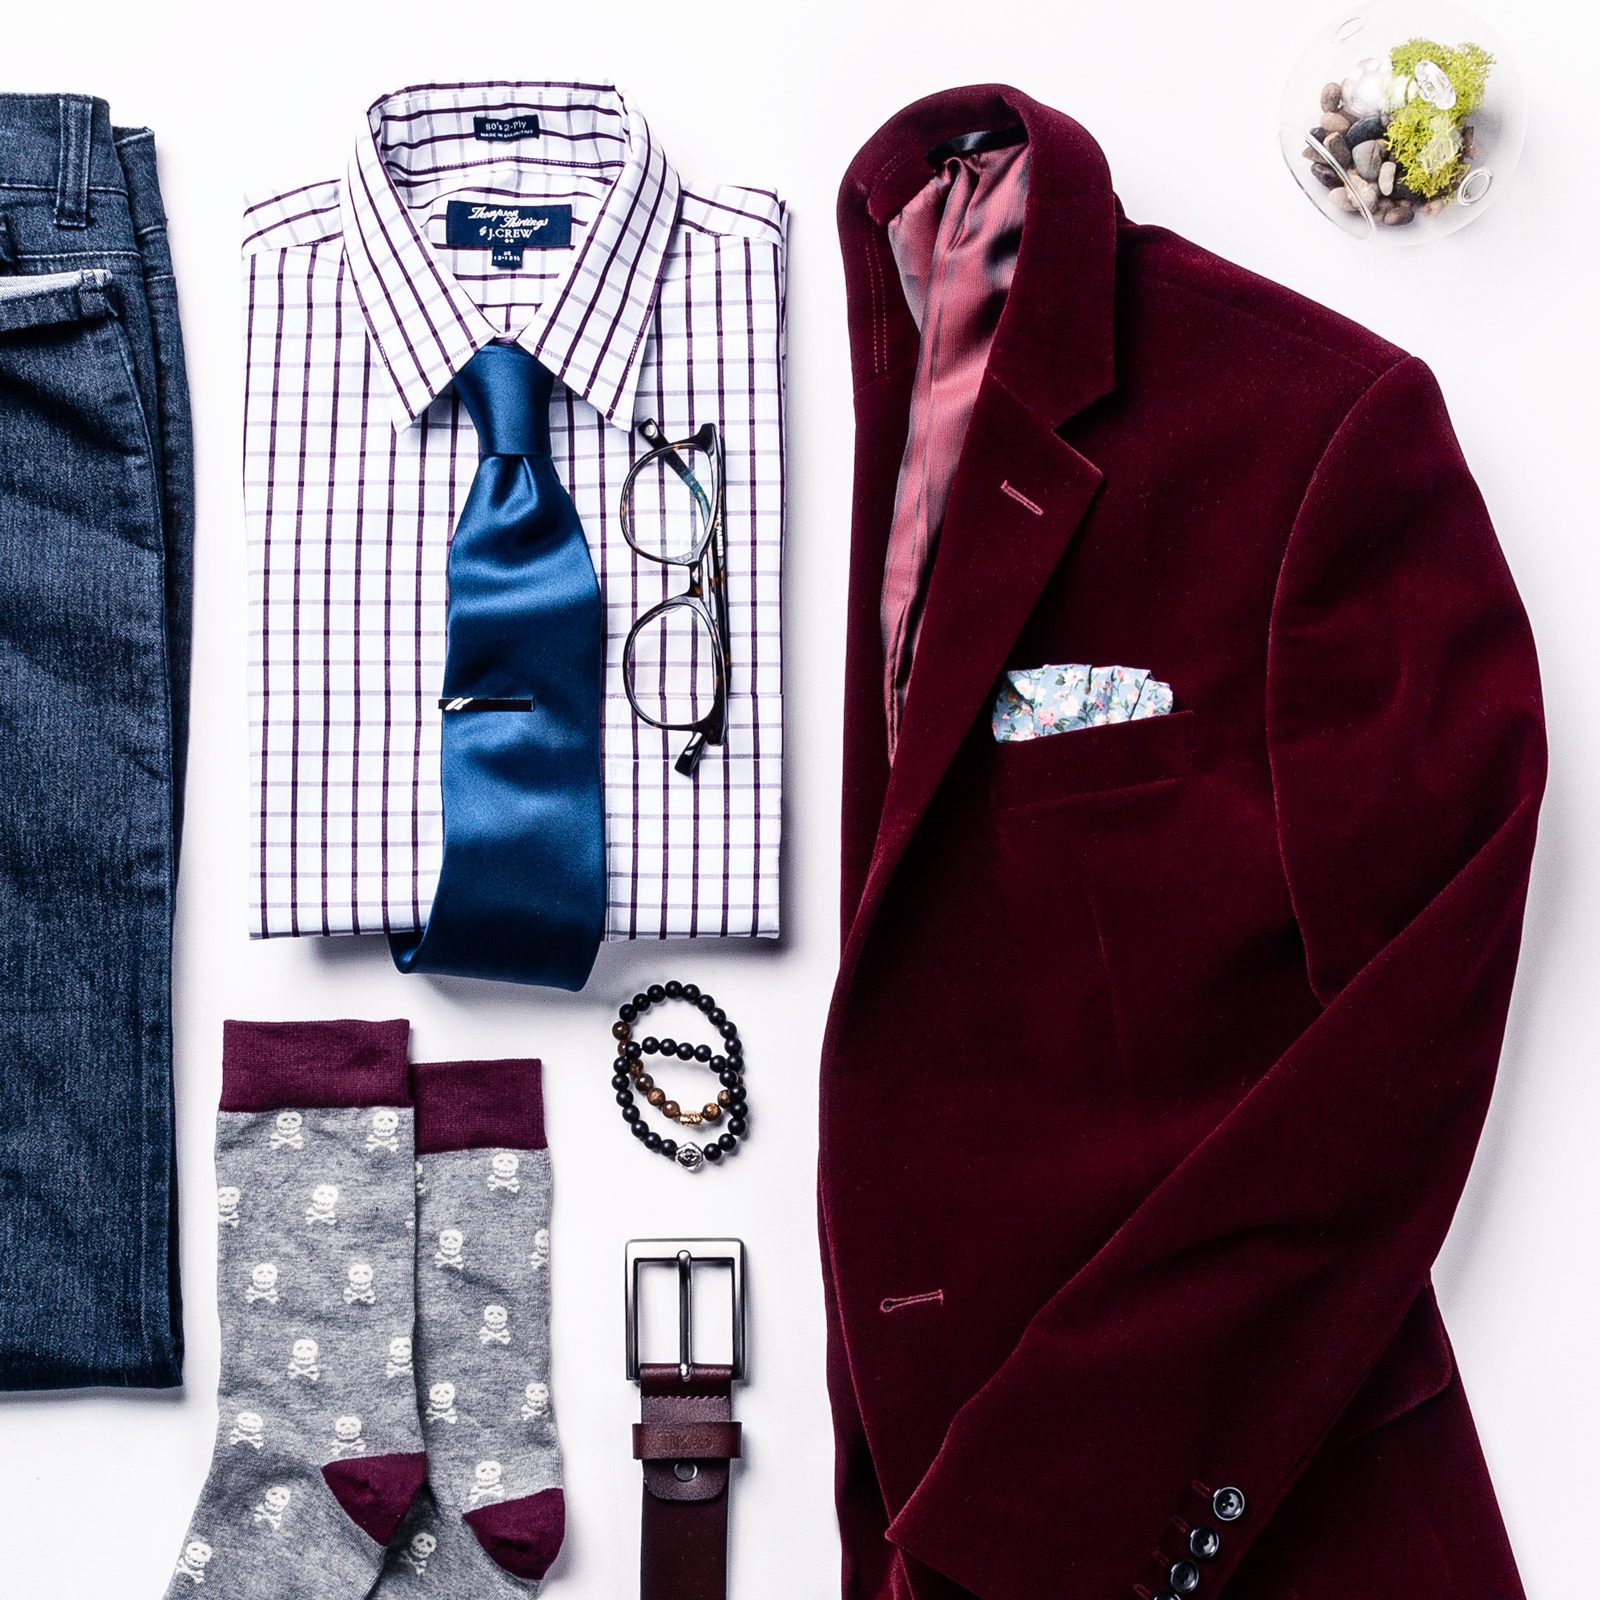 Have fun with business casual colors